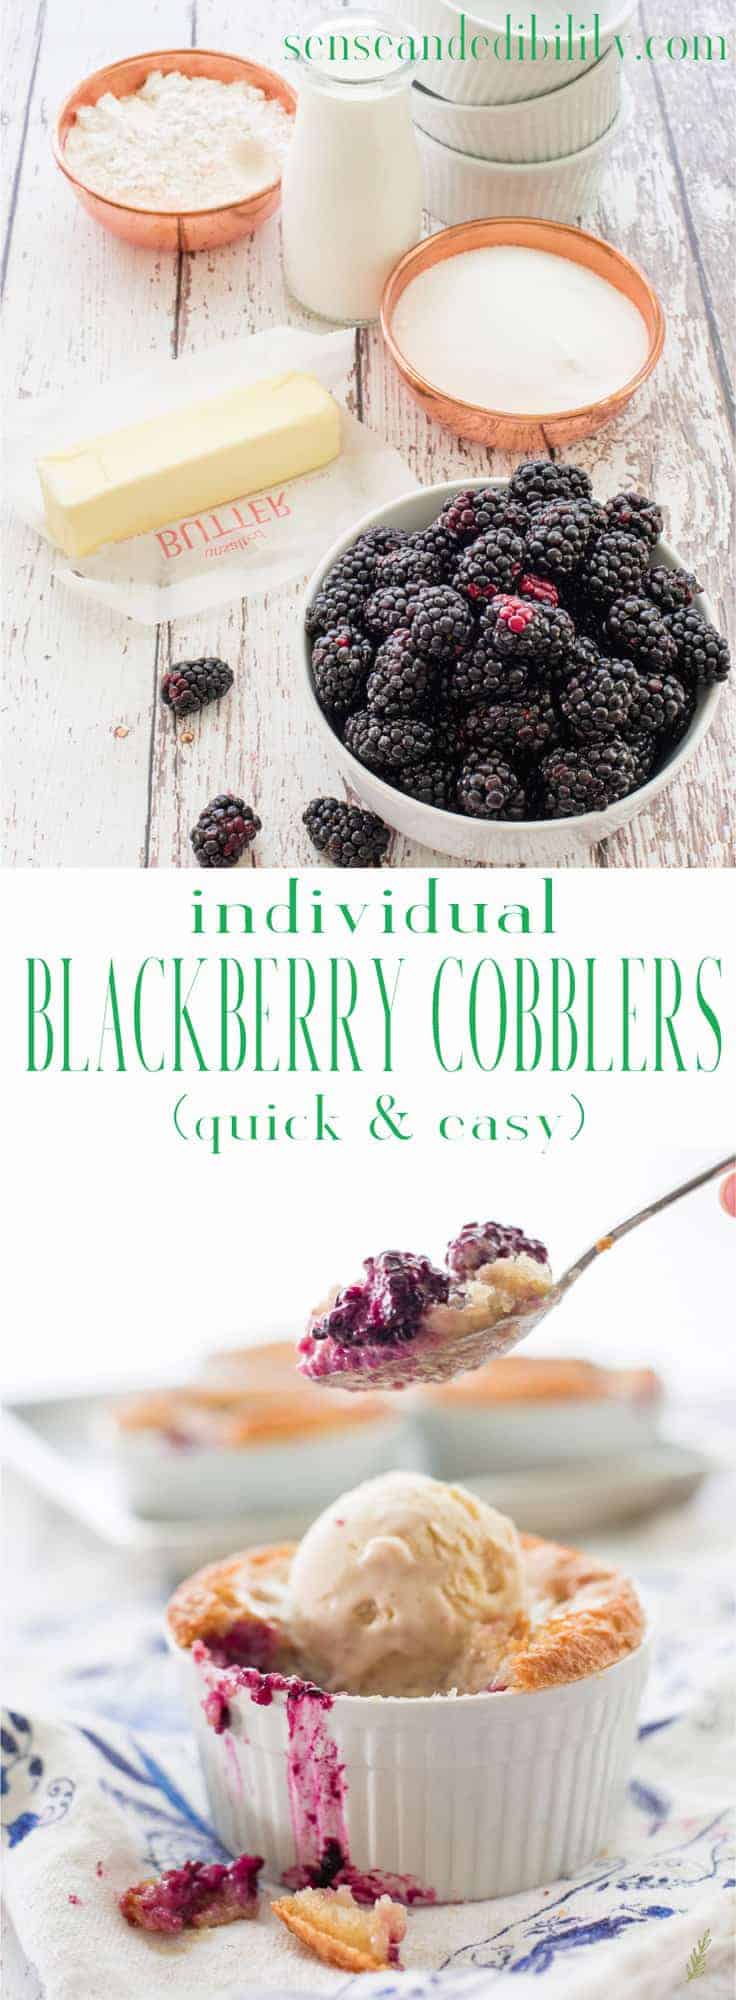 Blackberry Cobblers serve up the fruits of summer in the most delectable way. Topped with a batter crust, this dessert is the perfect sweet ending to your summertime meals. Don't forget a generous scoop of frozen custard to serve with it! #blackberrycobbler #cobbler #berrycobbler #dessert #alamode  via @ediblesense